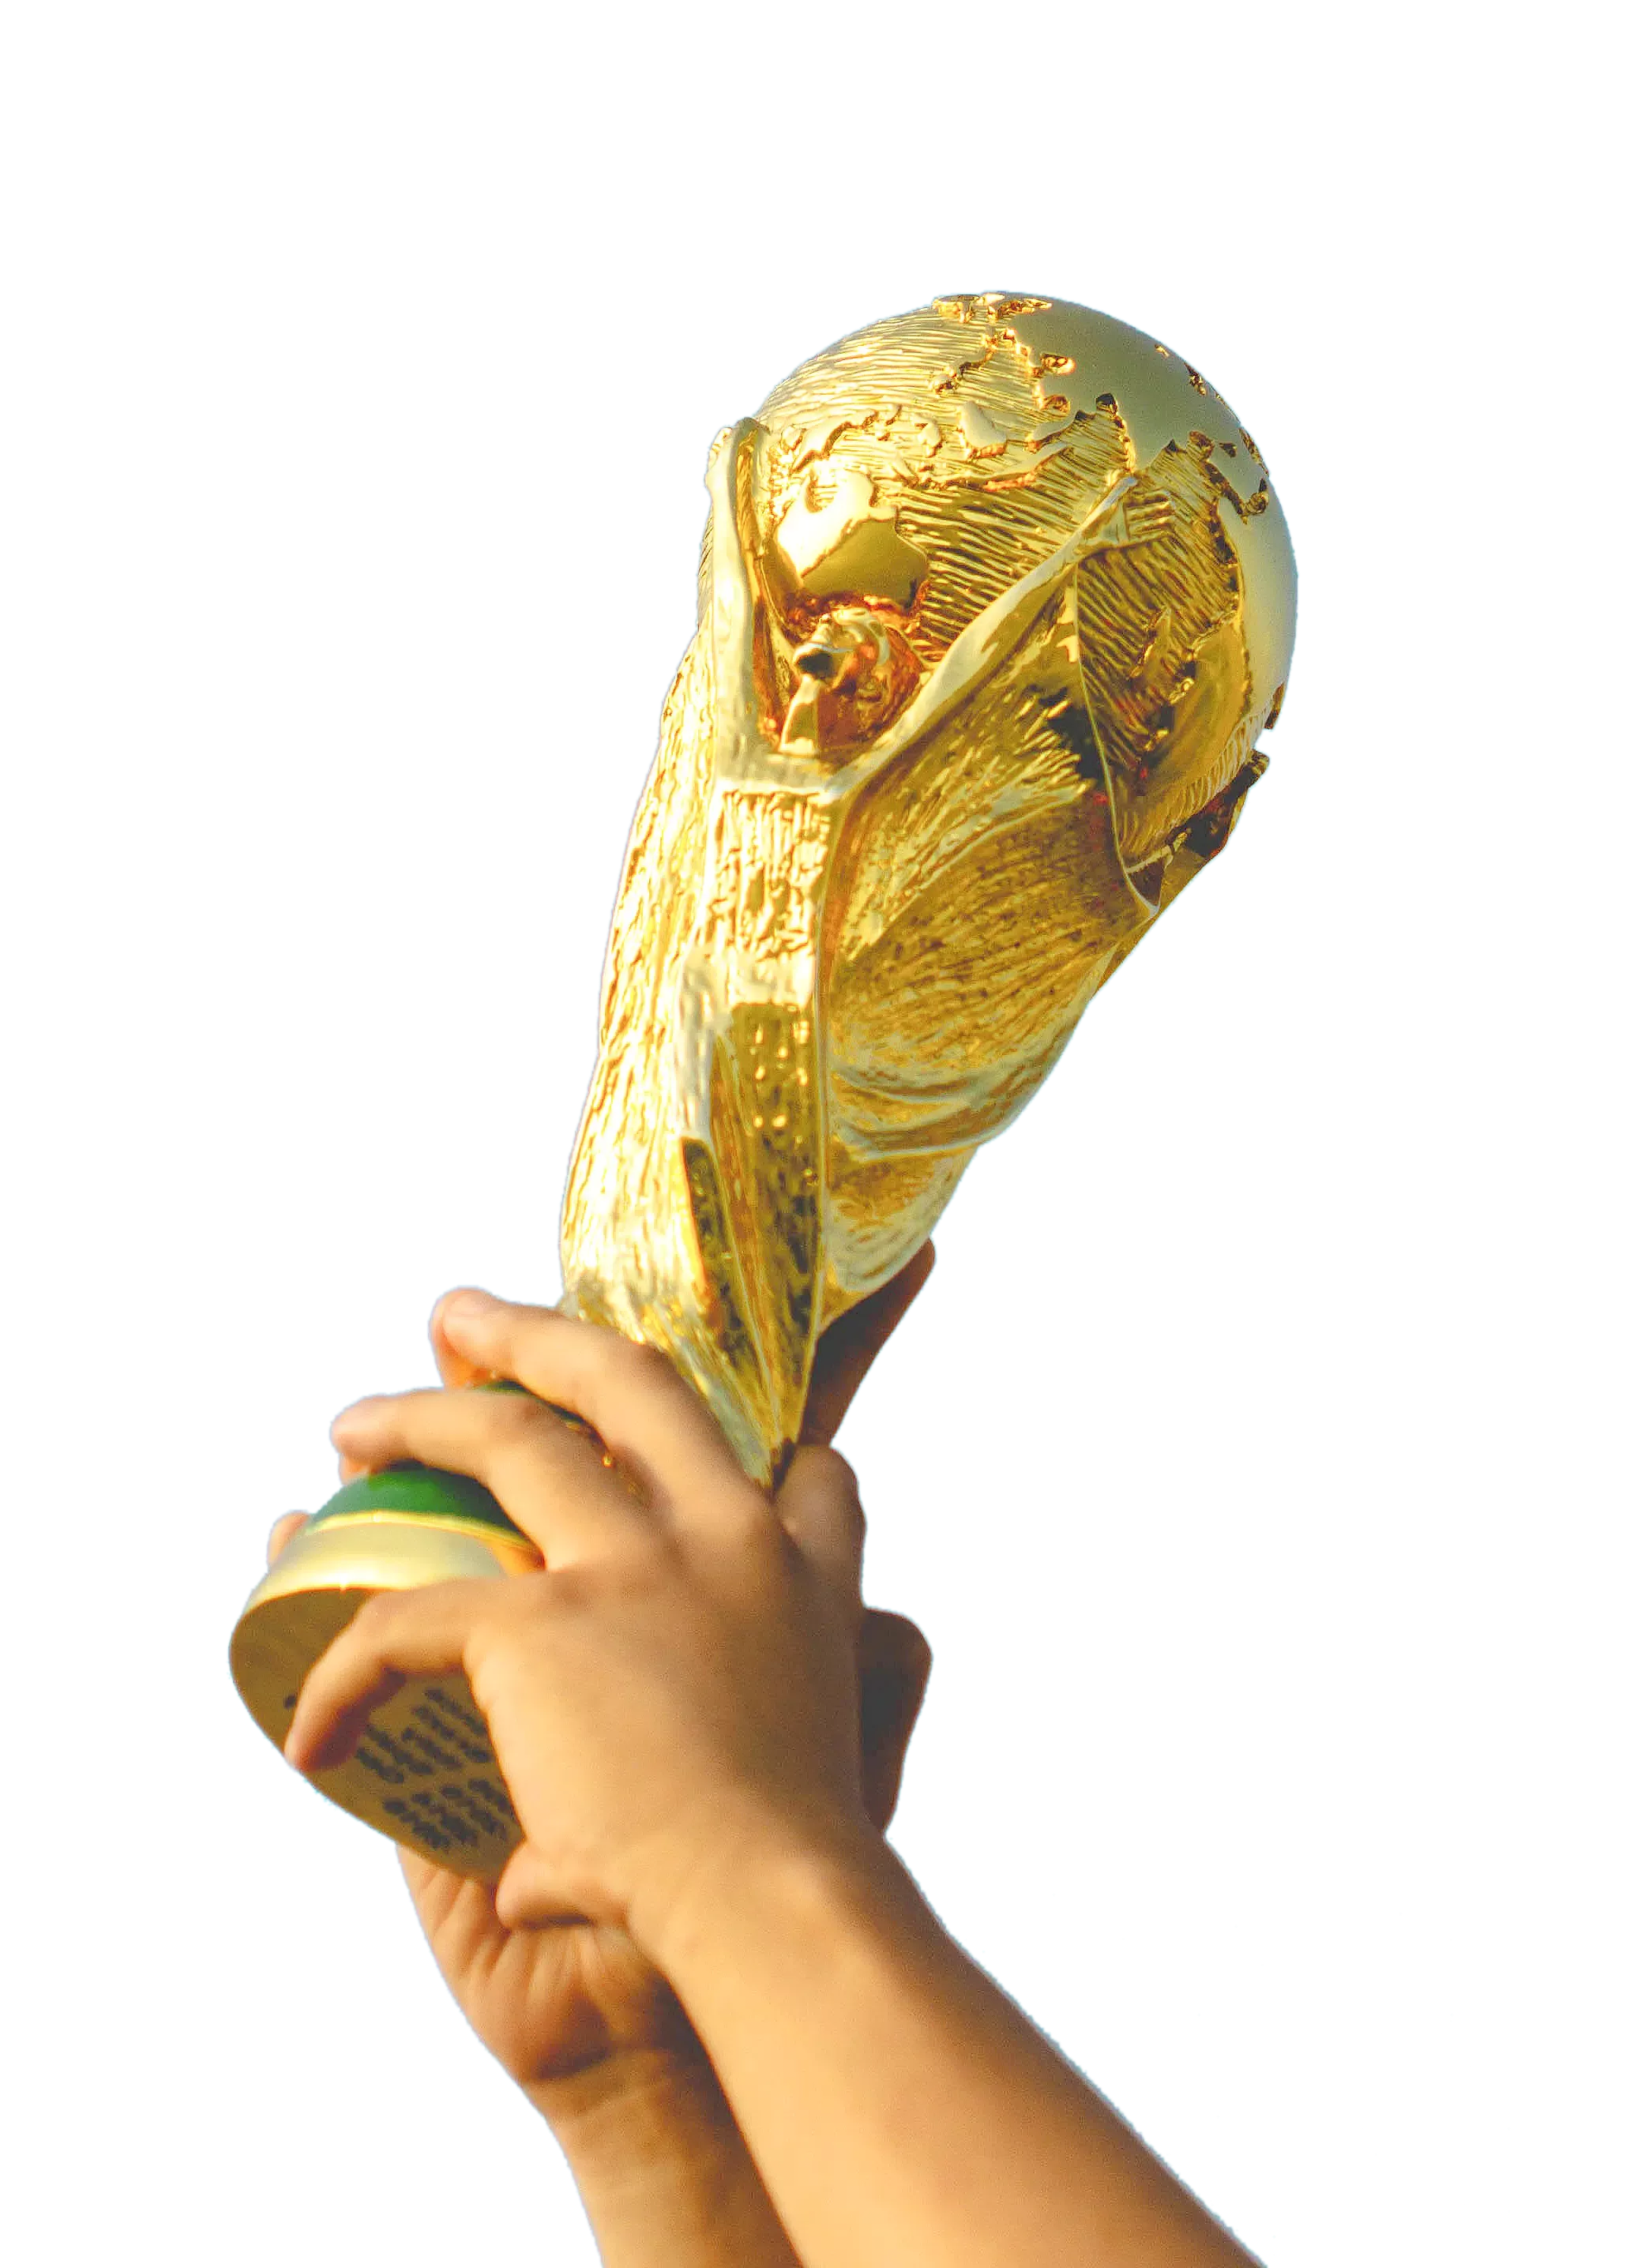 FIFA World Cup 2022™ trophy